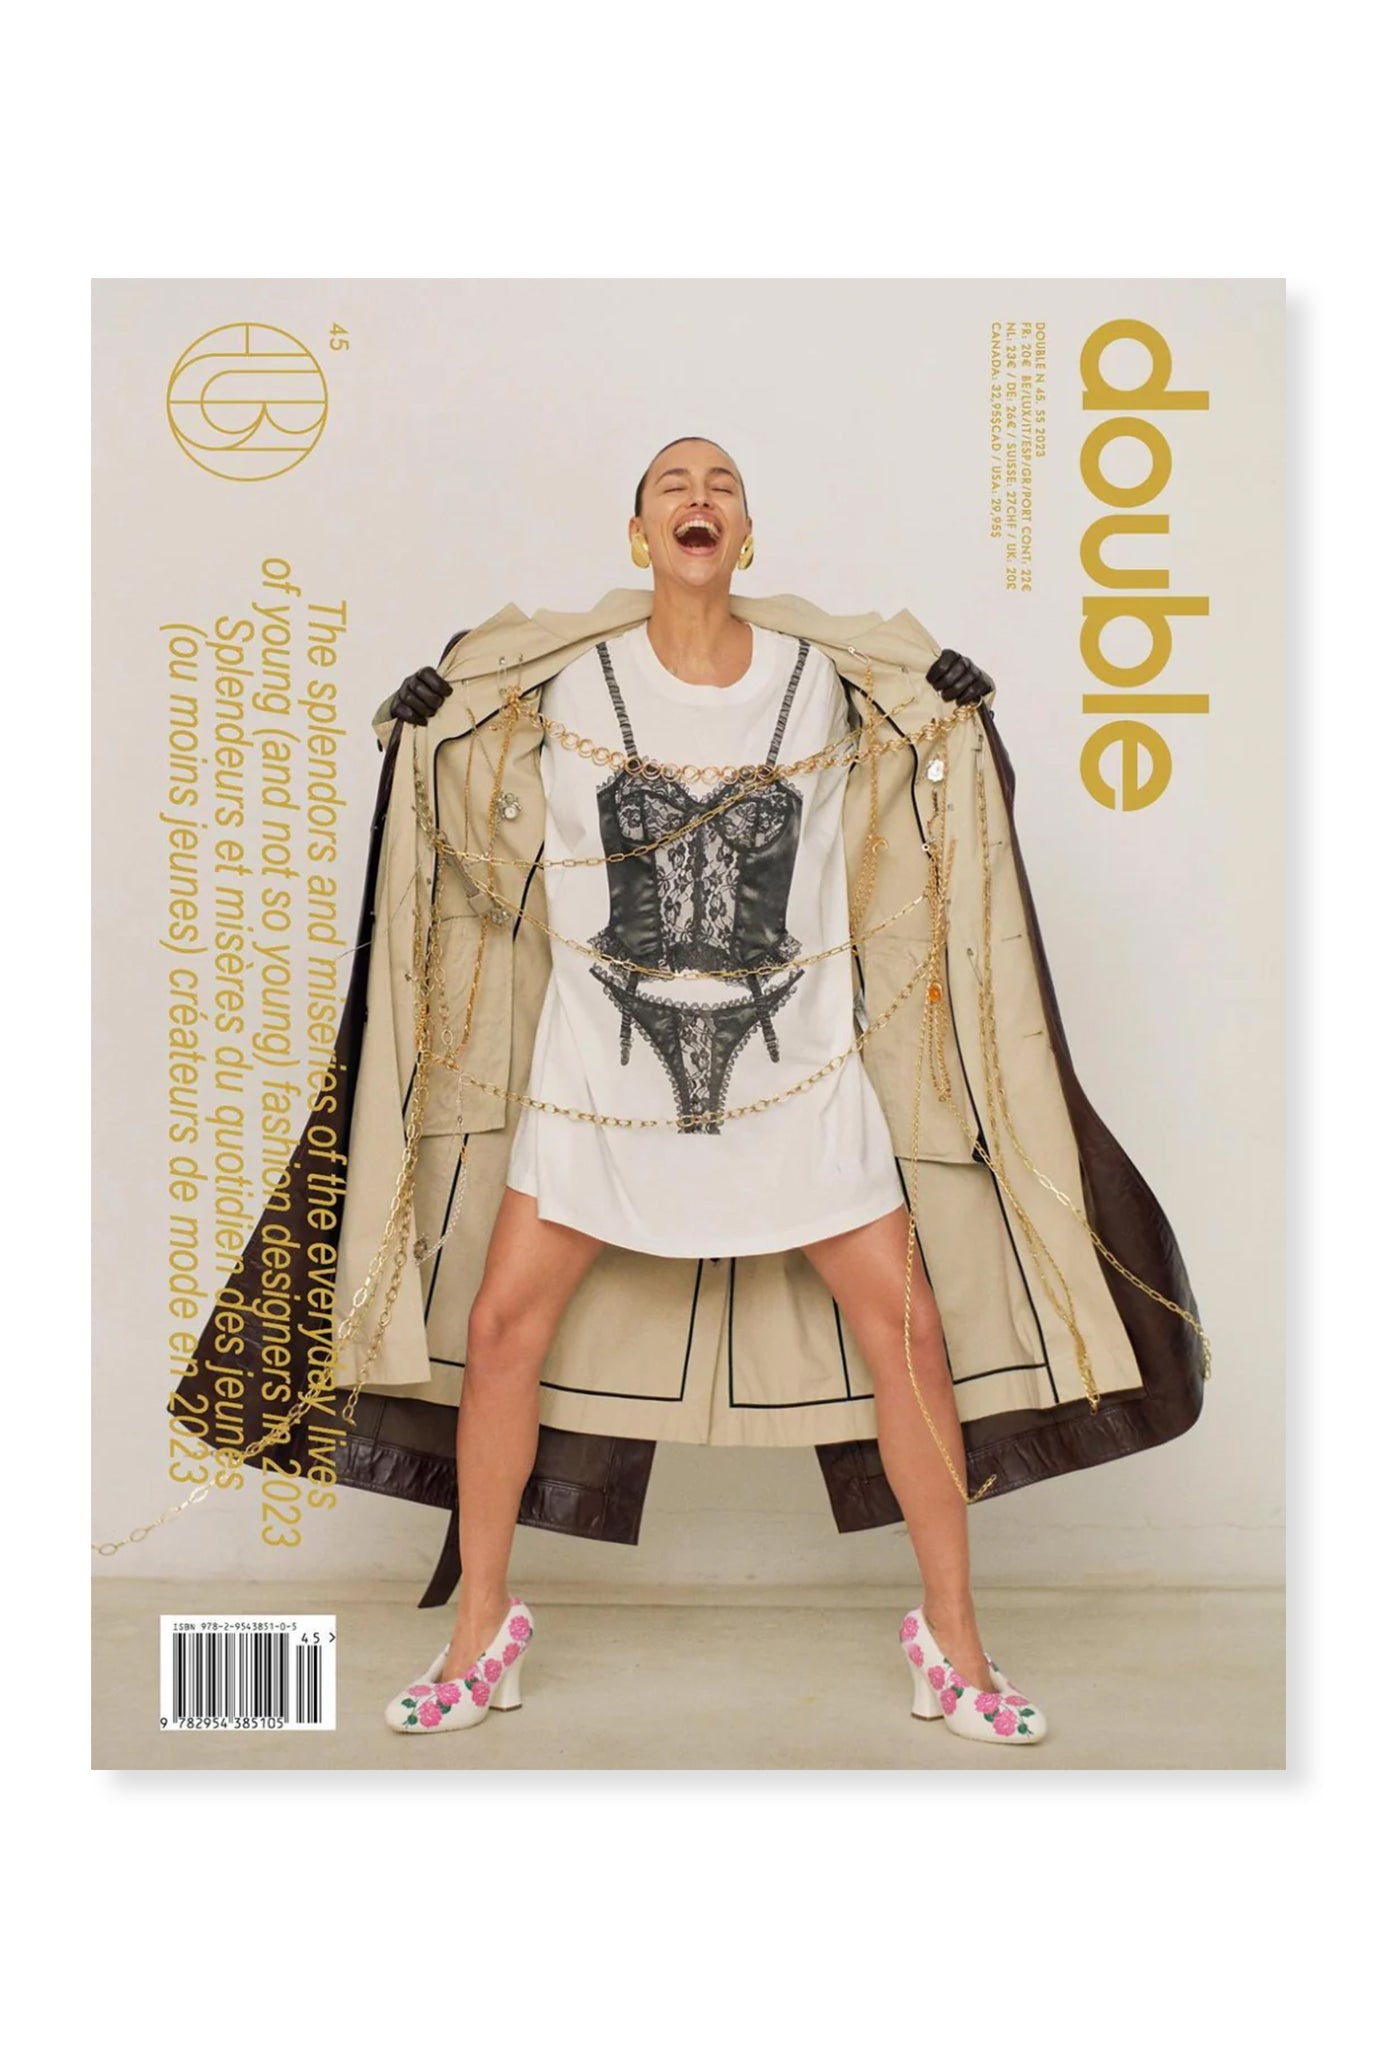 Double, Issue 45